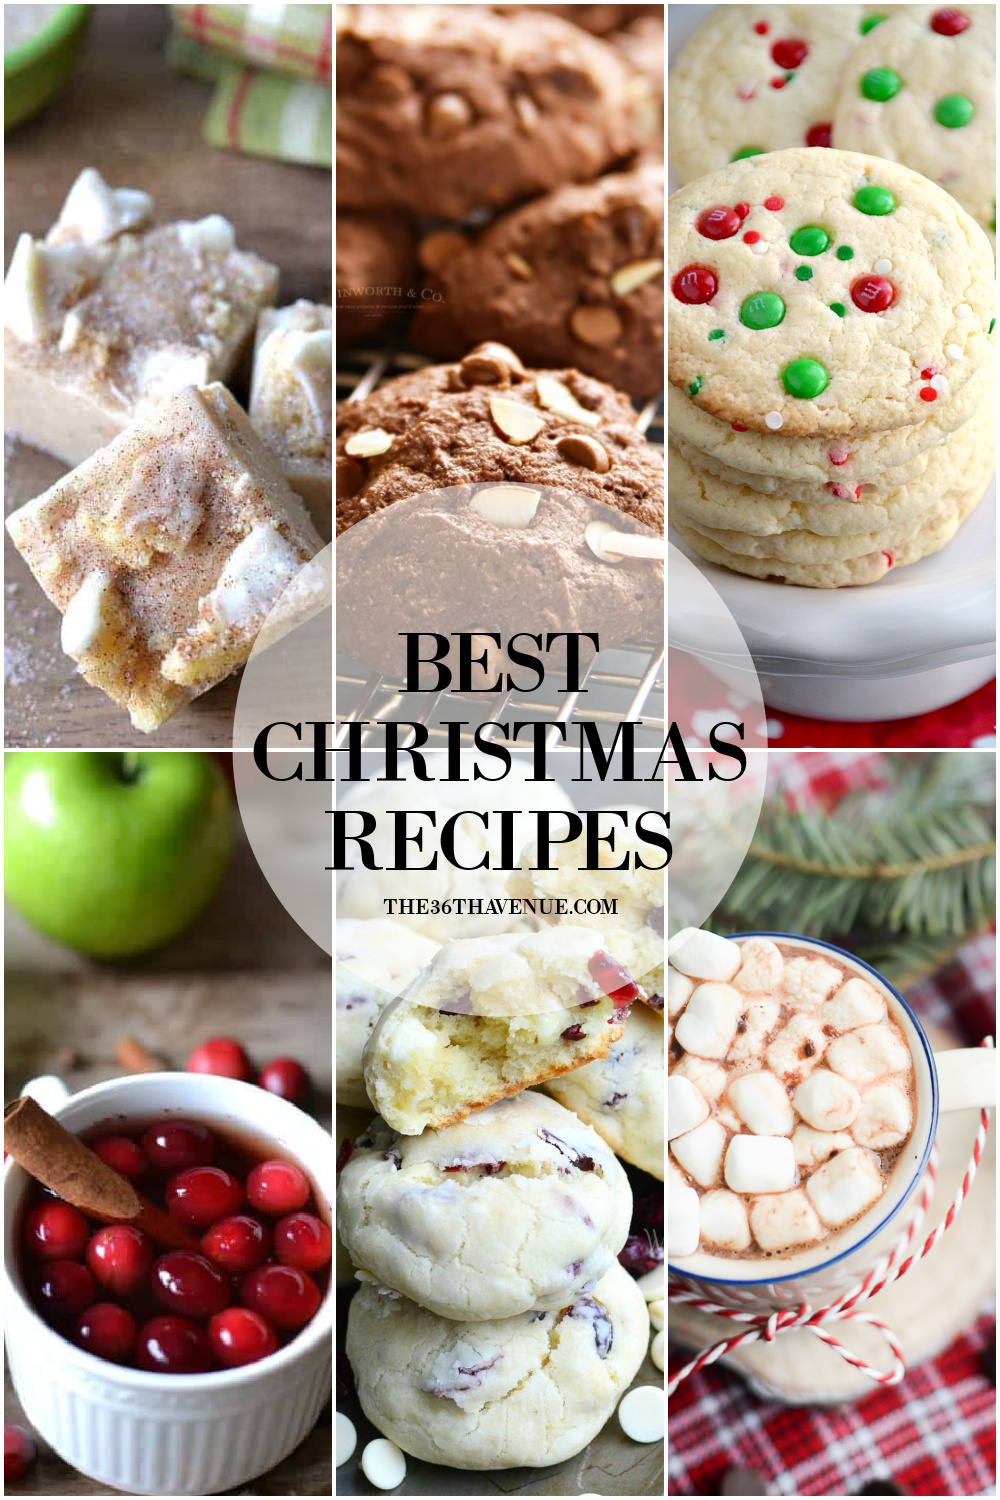 BEST CHRISTMAS RECIPES AT THE36THAVENUE.COM